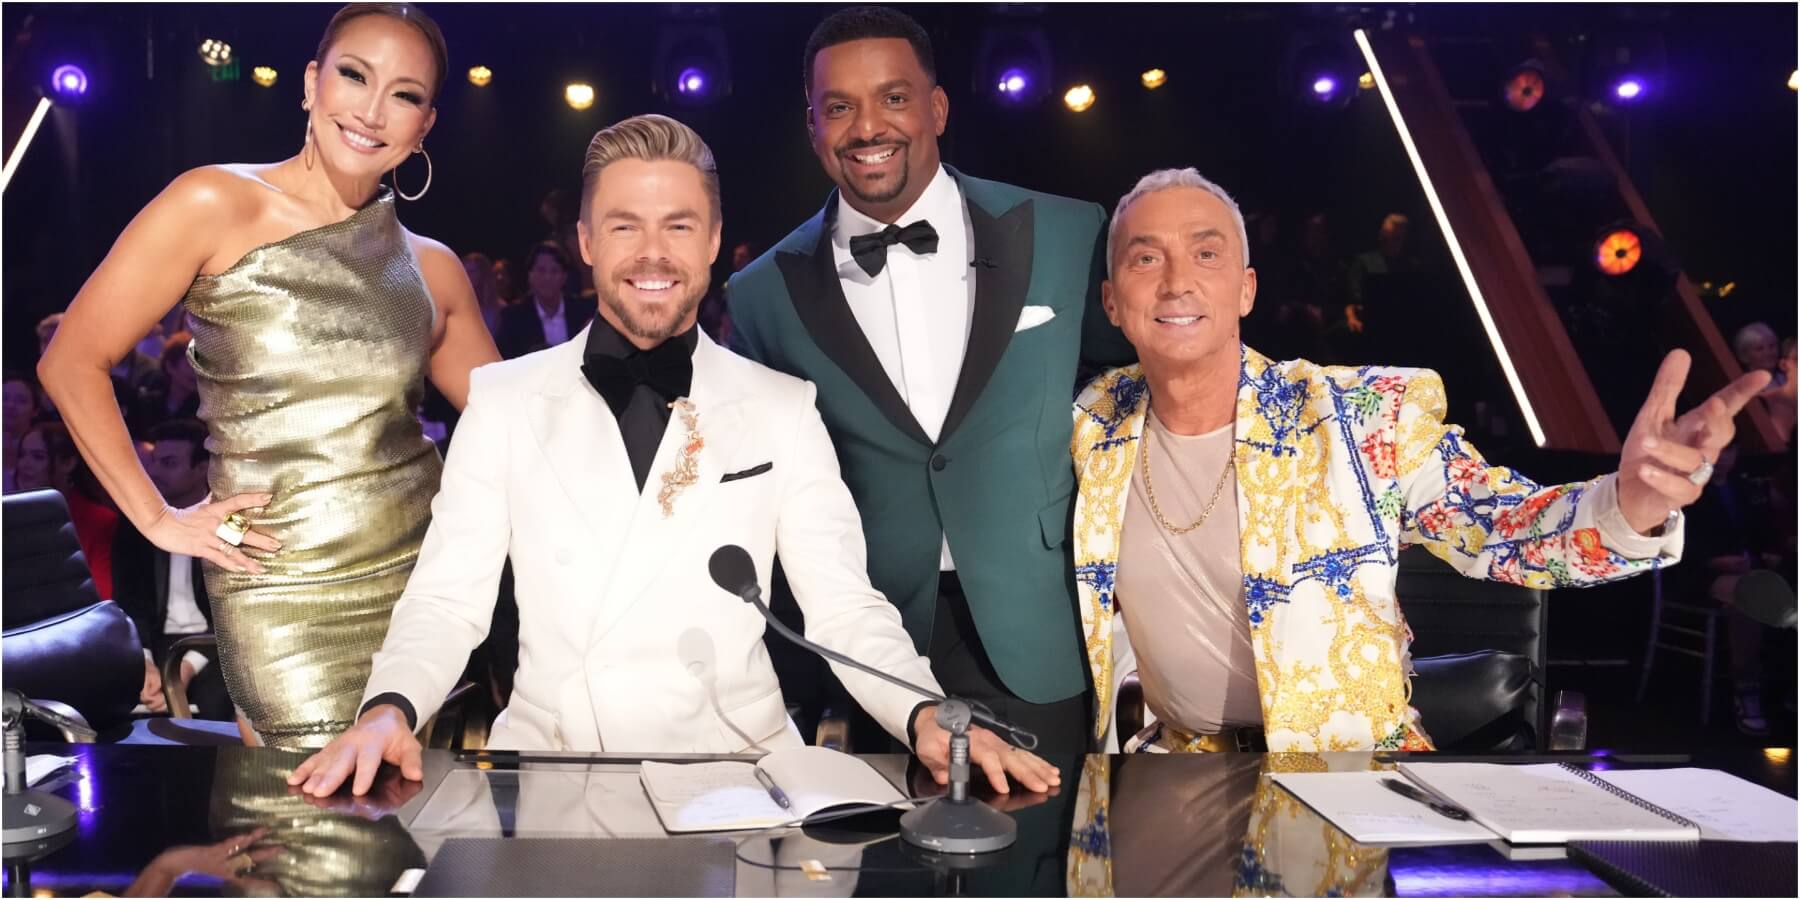 Carrie Ann Inaba, Derek Hough, Alfonso Ribiero, and Bruno Tonioli during the Season 32 finale of 'Dancing with the Stars'